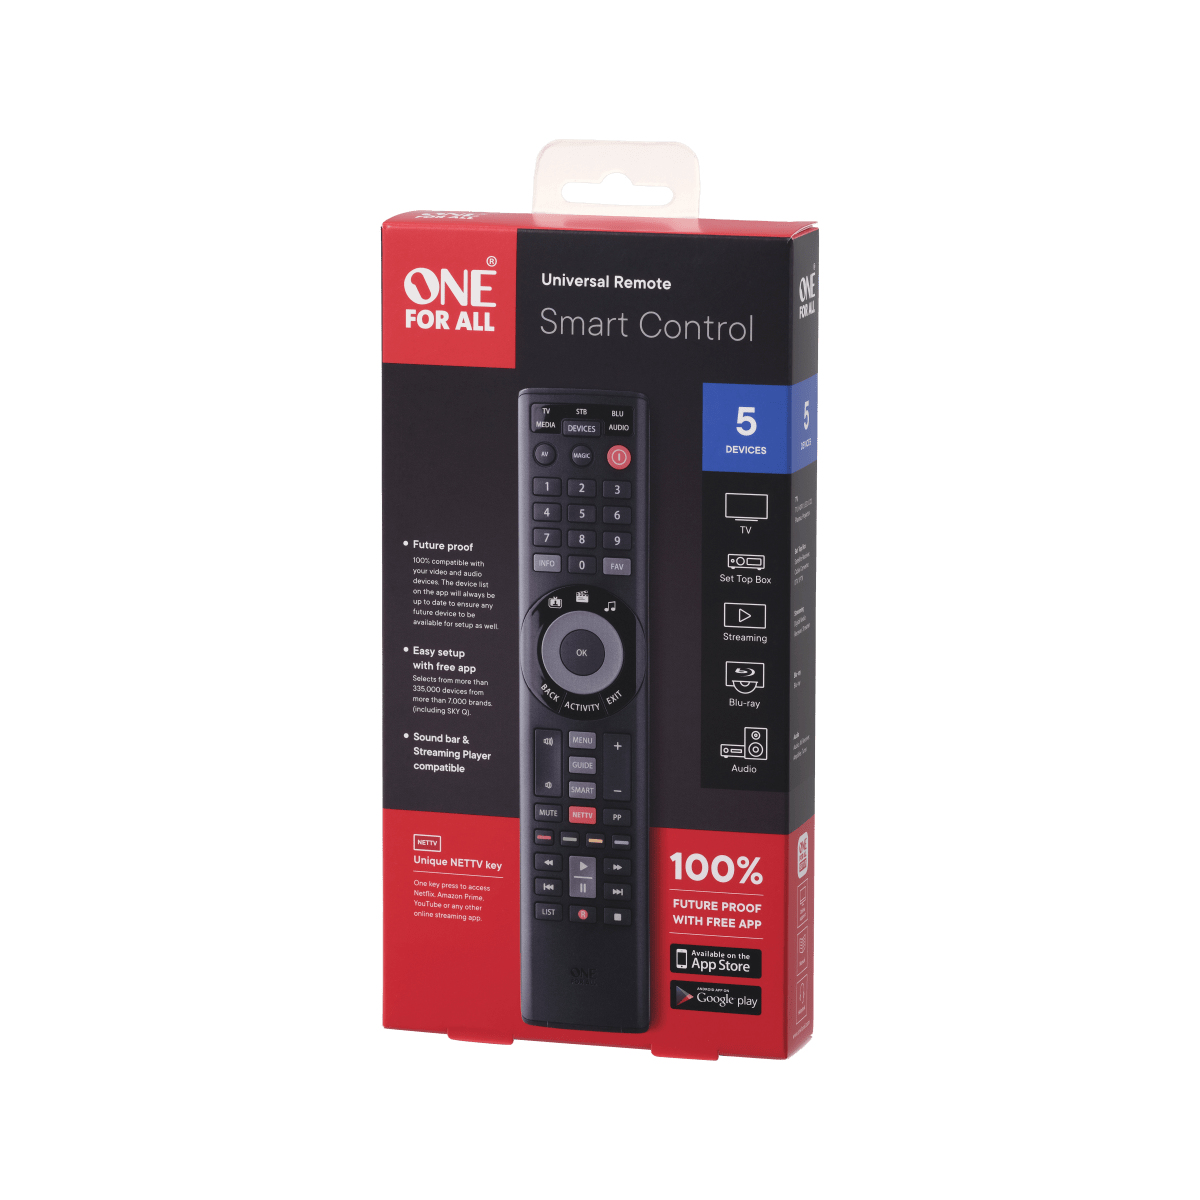 One for All URC7955  One For All Advanced Smart Control 5 télécommande IR  Wireless Acoustique, Cable, DTT, DVD/Blu-ray, console de jeux, Système home  cinema, IPTV, Media player, SAT, STB, TNT, TV